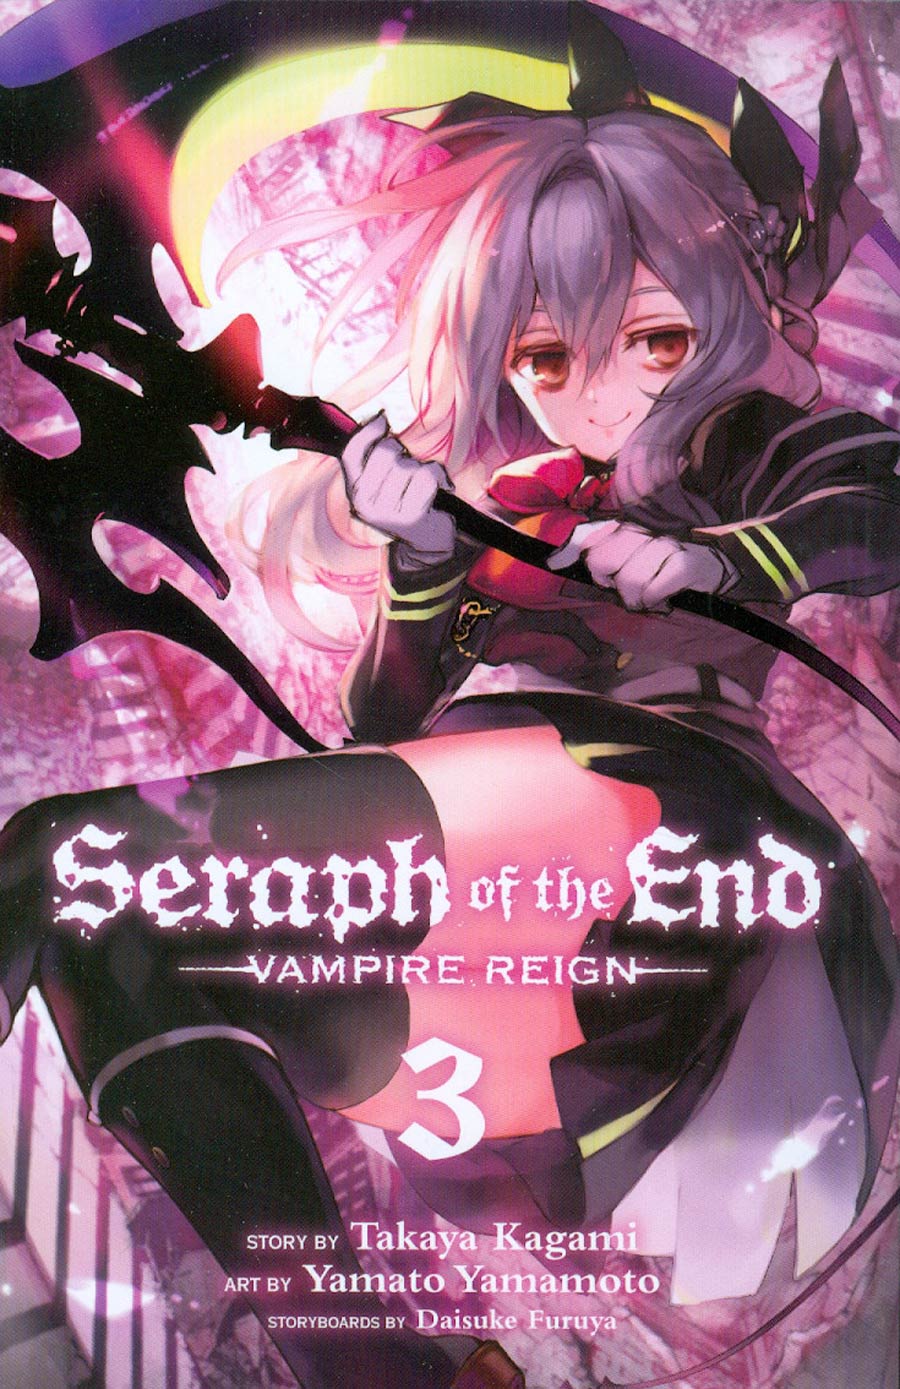 Seraph Of The End Vampire Reign Vol 3 TP